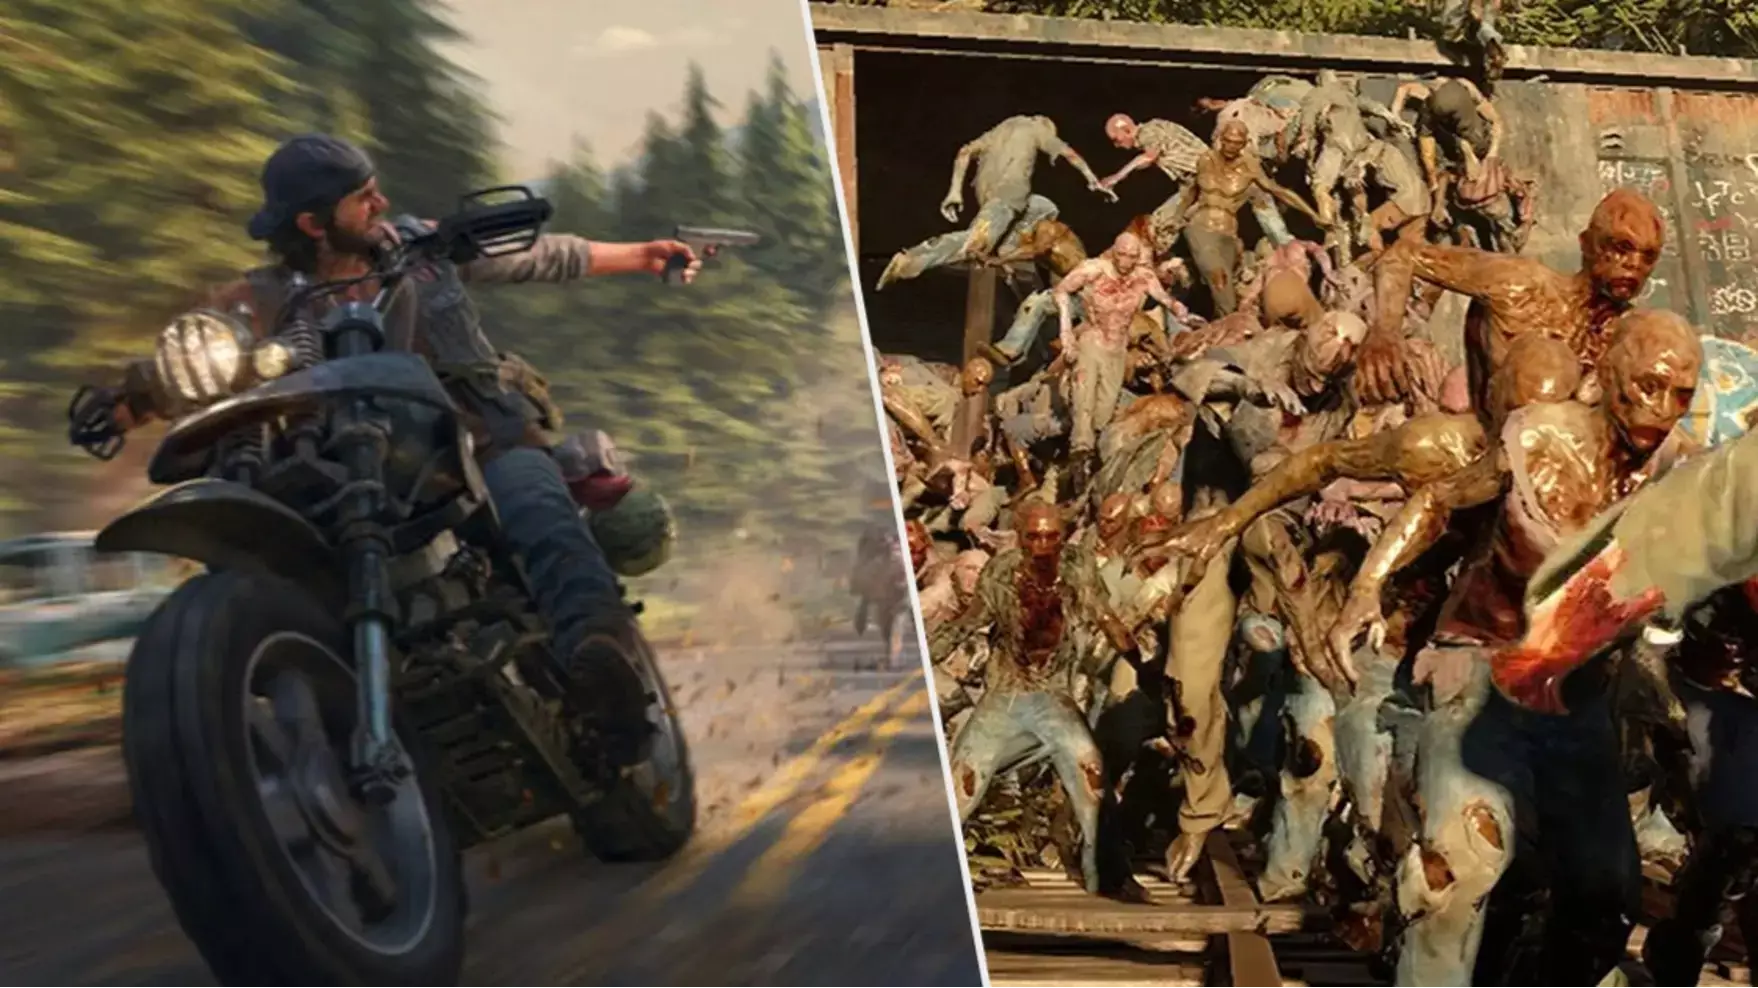 'Days Gone' Mod Makes Hordes Even Scarier With 700 Zombies To Fight